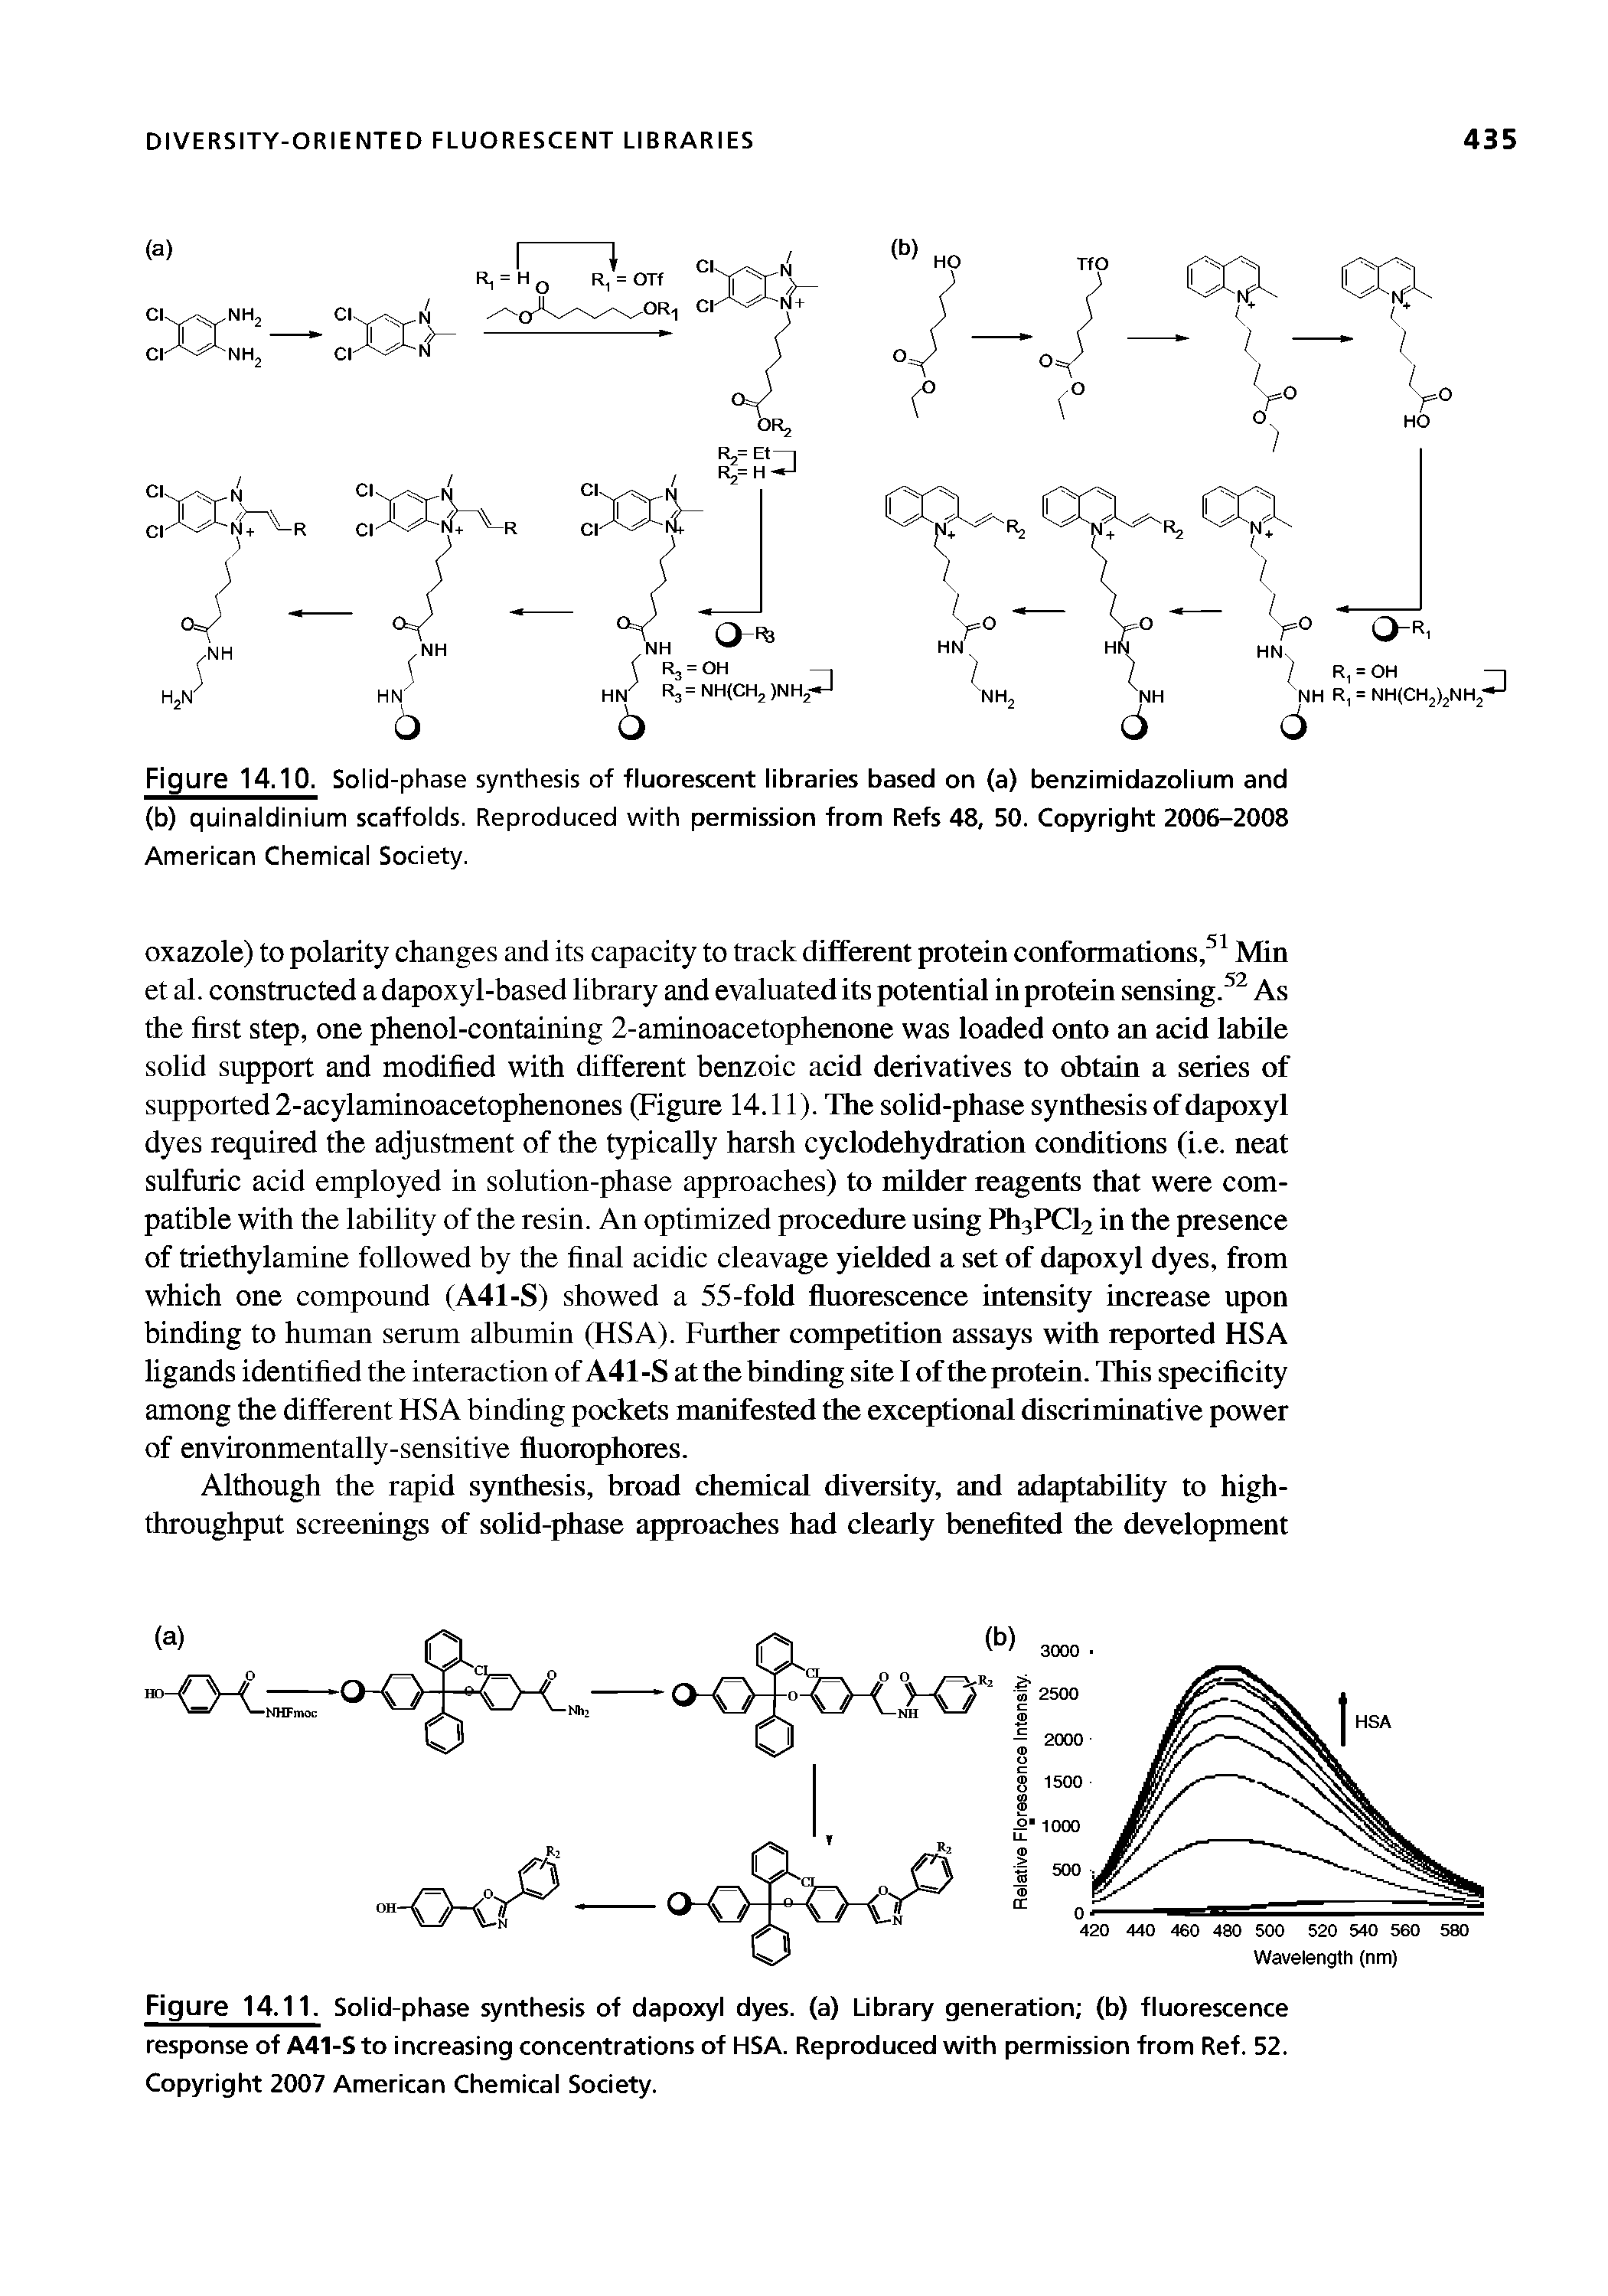 Figure 14.10. Solid-phase synthesis of fluorescent libraries based on (a) benzimidazolium and (b) quinaldinium scaffolds. Reproduced with permission from Refs 48, 50. Copyright 2006-2008 American Chemical Society.